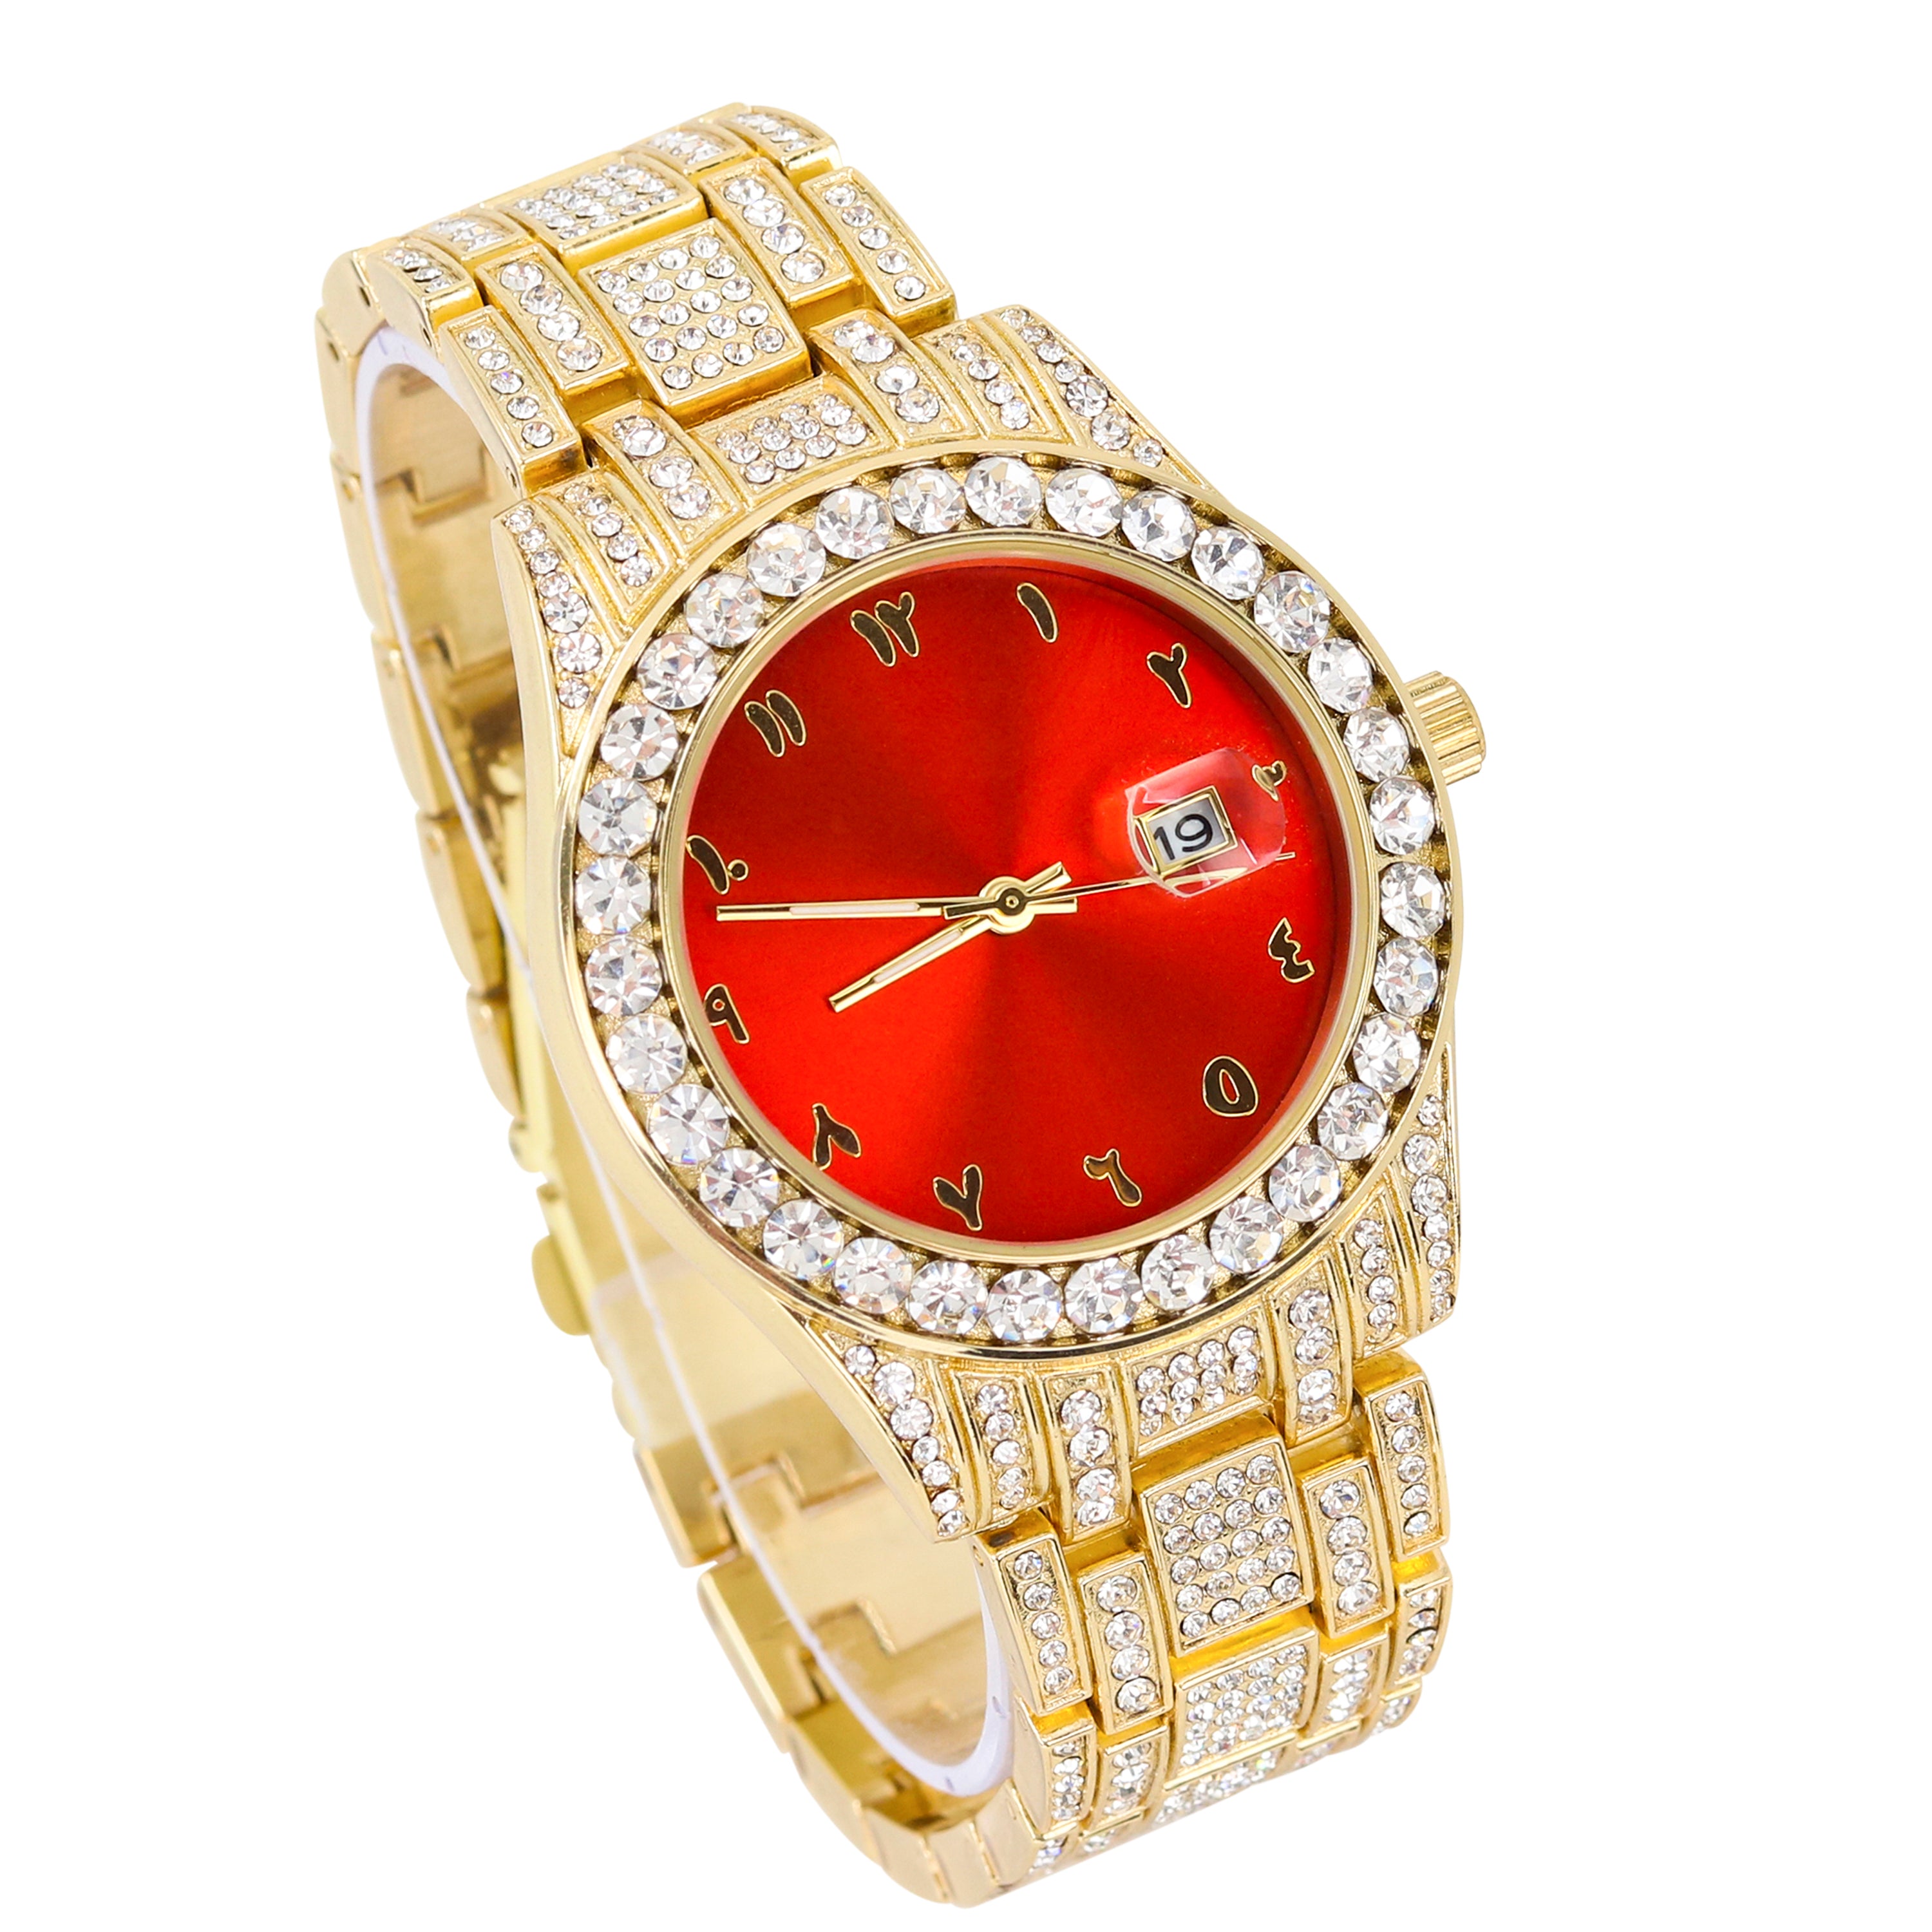 Men's Round Iced Out Watch 40mm Gold - Arab Dial